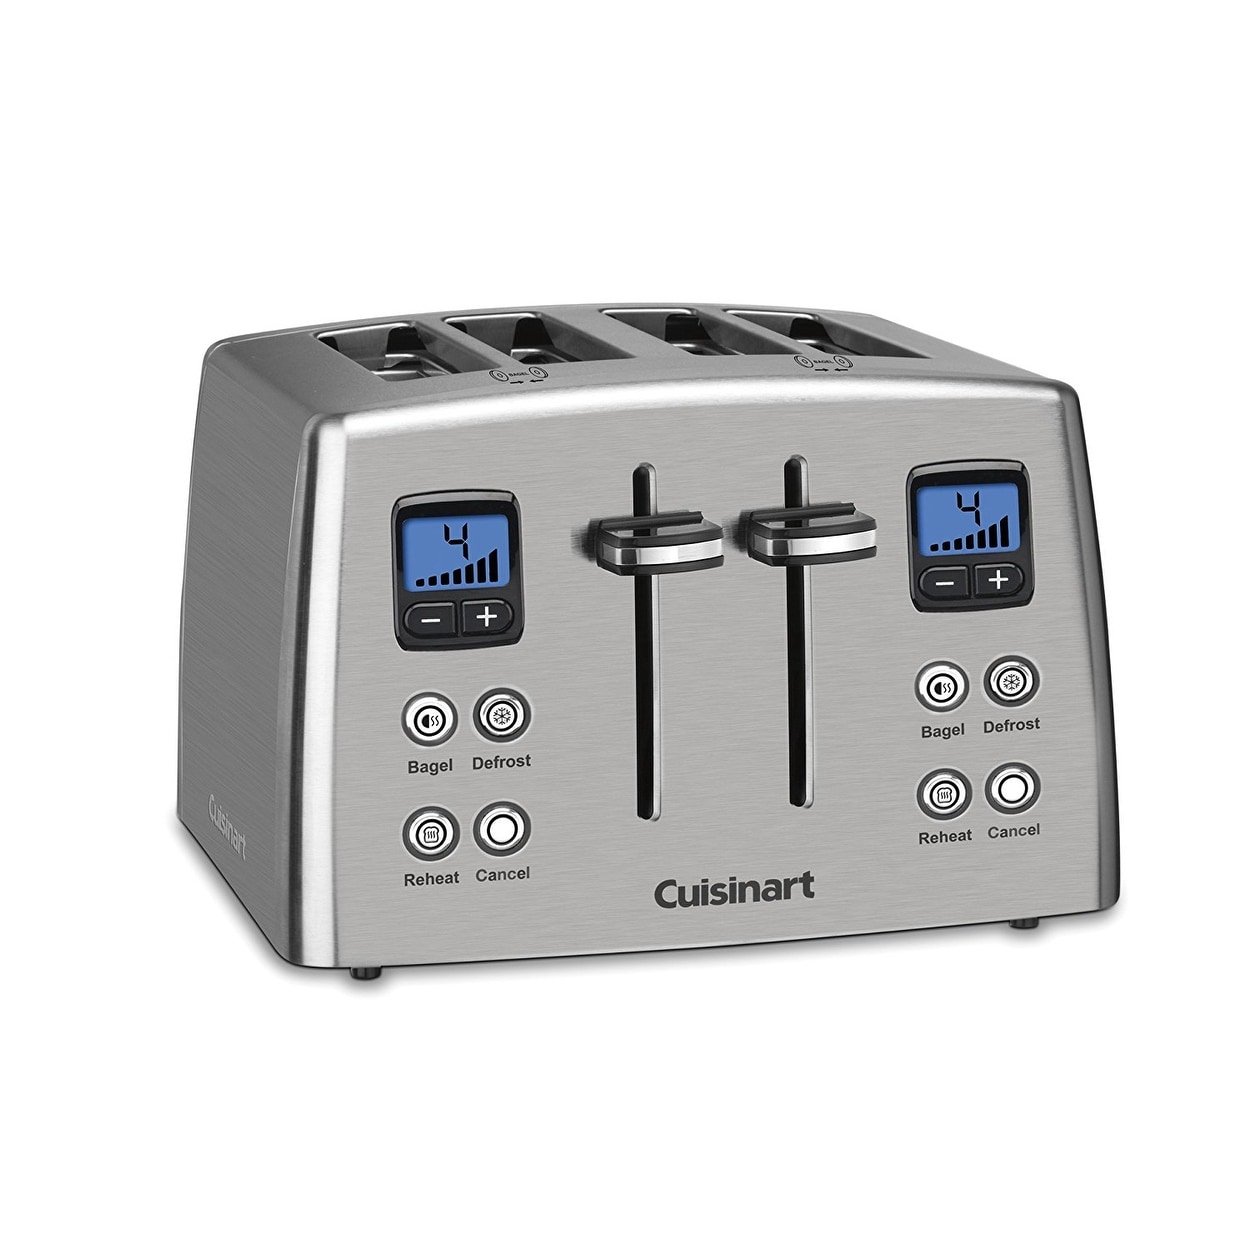 https://ak1.ostkcdn.com/images/products/is/images/direct/4ef36d9d6bce07ce3427bf611fb1565f6ae36142/Cuisinart-CPT-435-Countdown-4-Slice-Toaster%2C-Stainless-Steel.jpg